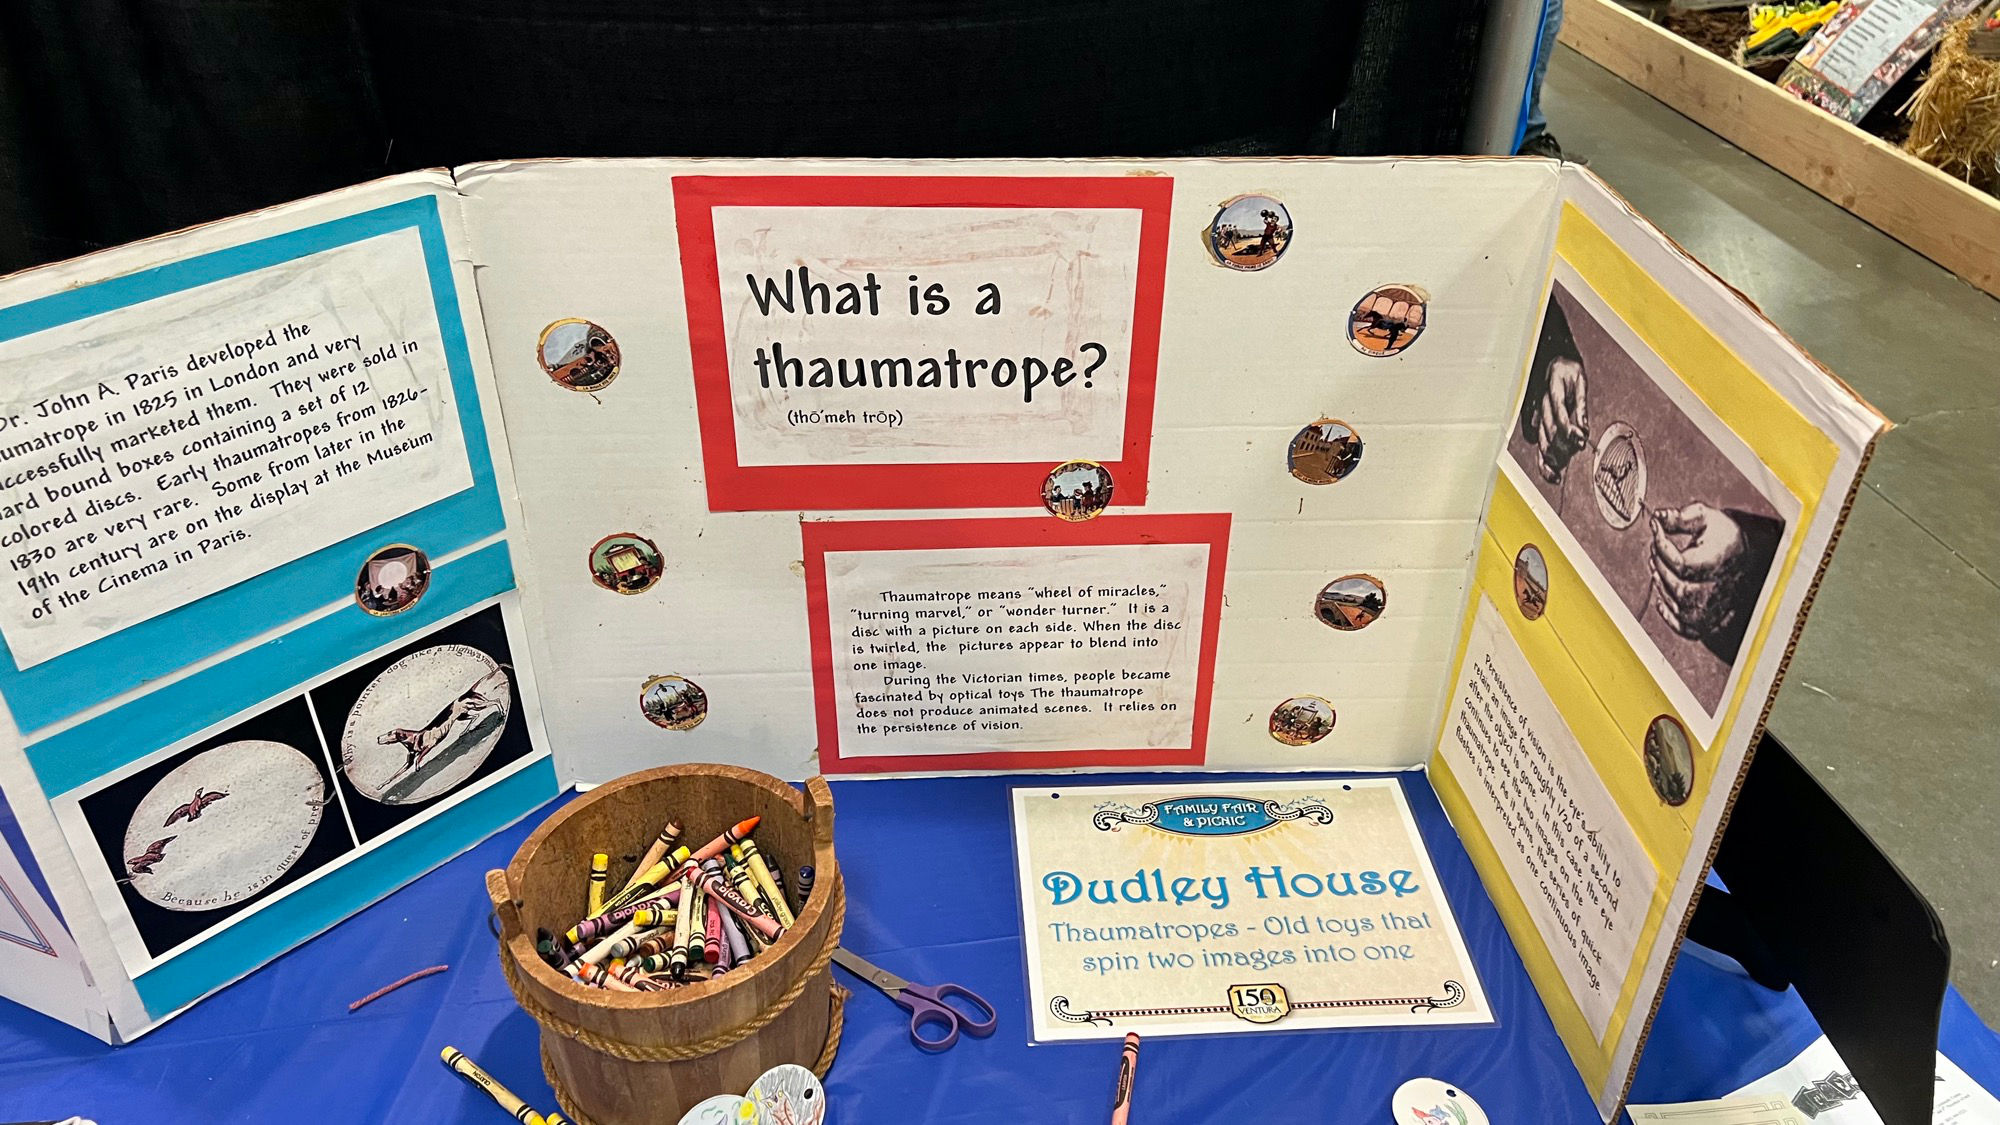 Dudley House Museum What is a Thaumatrope?